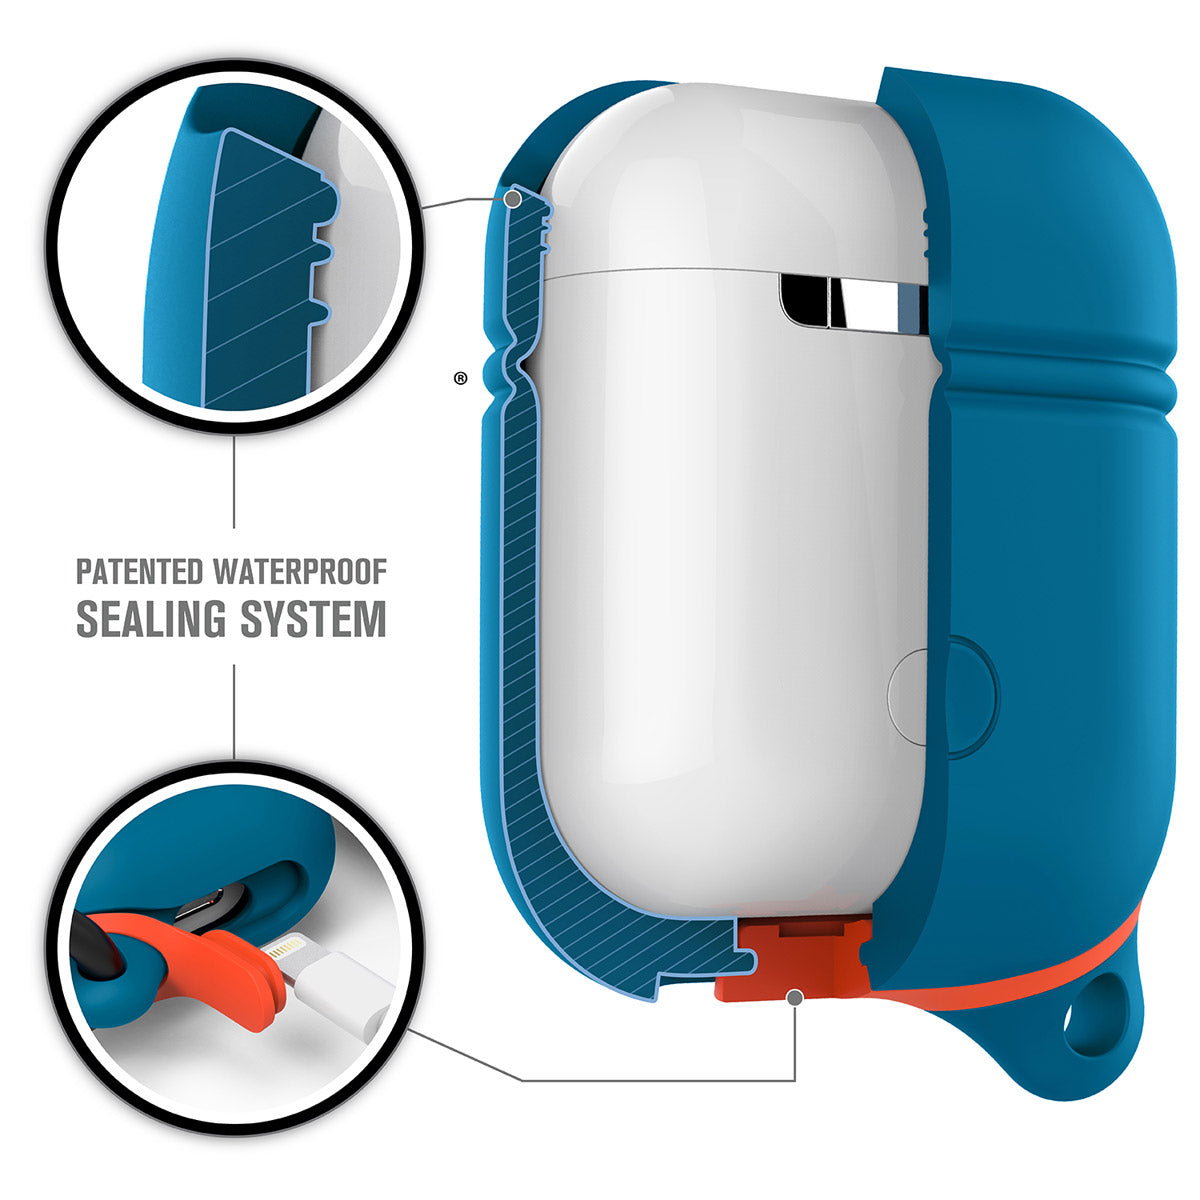 CATAPDTBFC-FBA | Catalyst airpods gen2/1 waterproof case + carabiner showing the inner materials of the case in blueridge sunset text reads patented waterproof sealing system